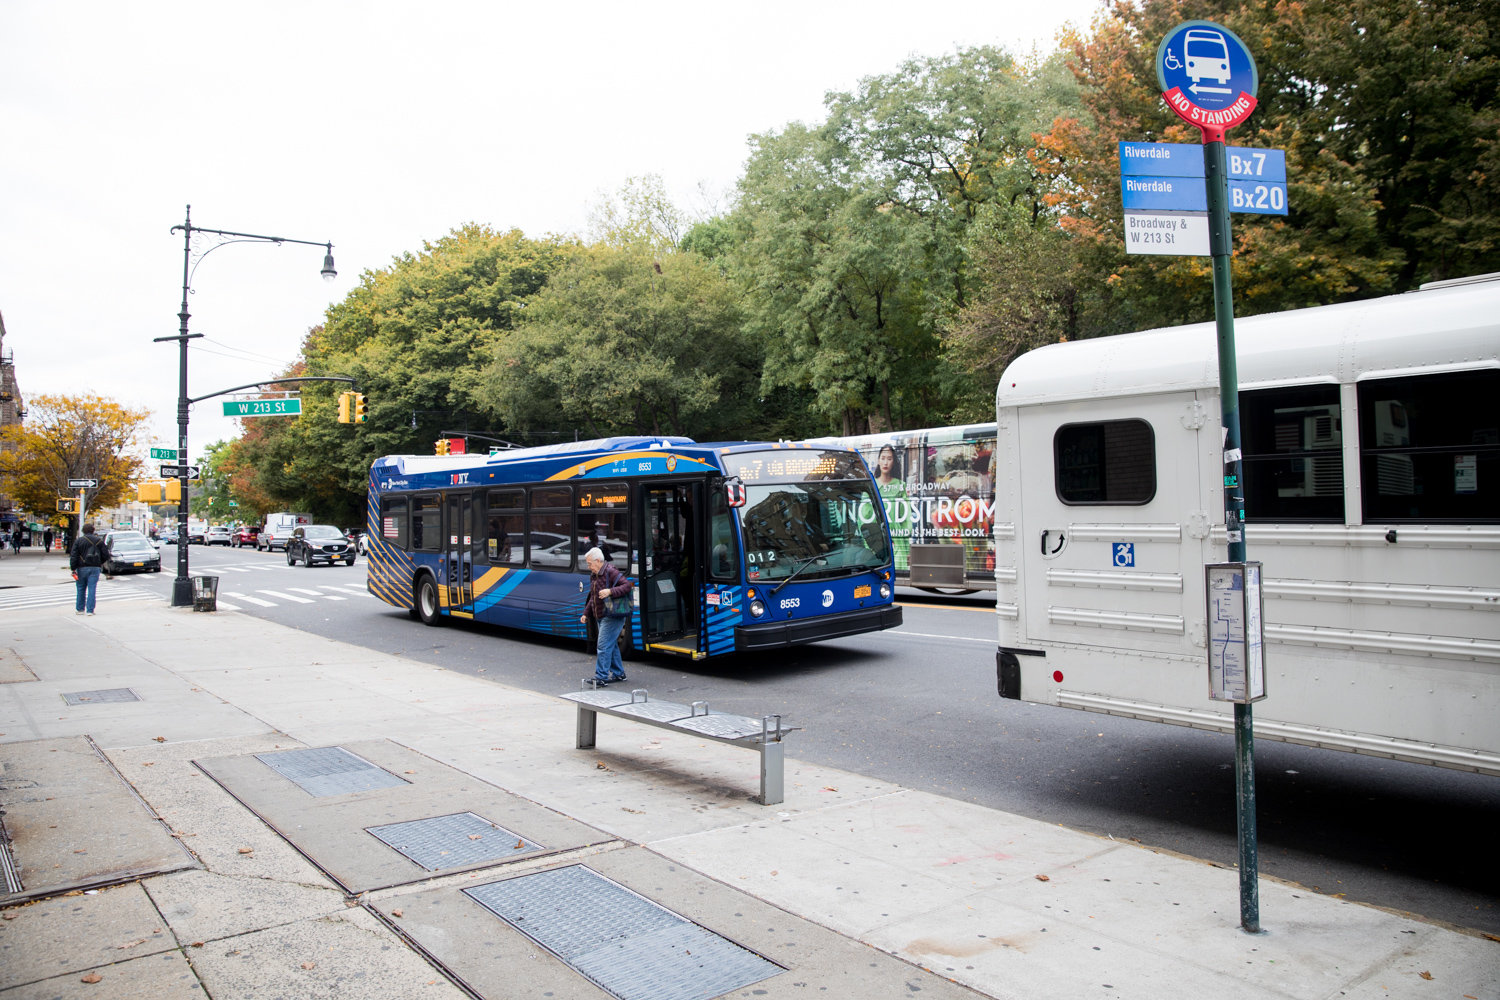 A Riverdale-bound Bx7 bus stops at West 213th Street and Broadway, a stop that will disappear if the Metropolitan Transportation Authority’s redesign of the borough’s bus network comes to fruition. A total of 13 stops are slated to be removed from the Bx7 route.